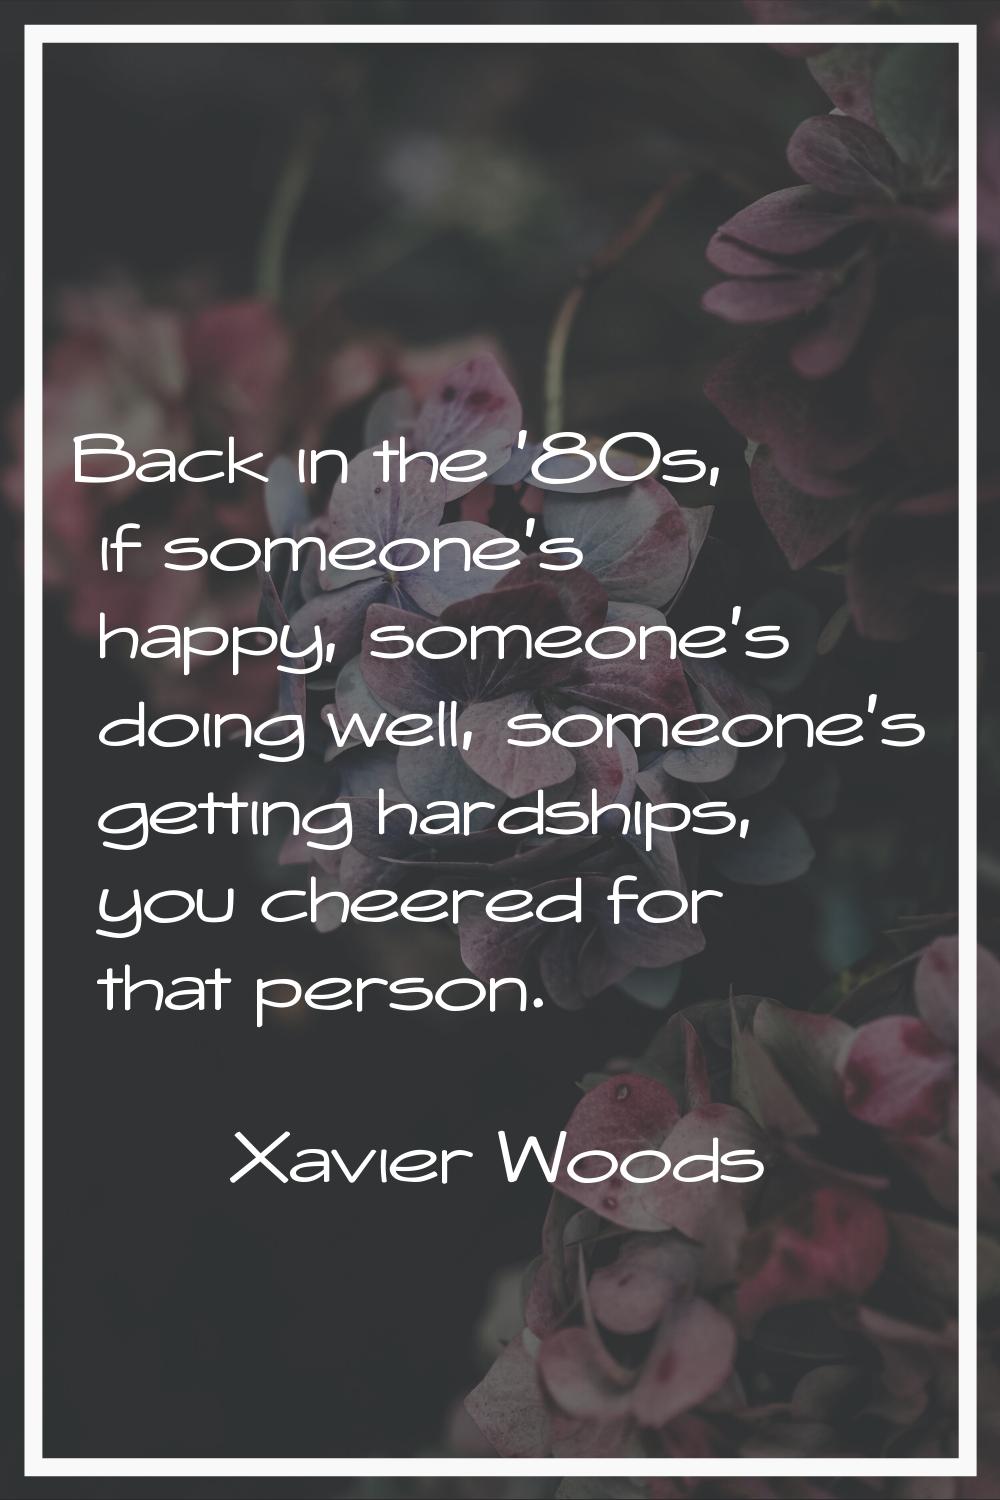 Back in the '80s, if someone's happy, someone's doing well, someone's getting hardships, you cheere